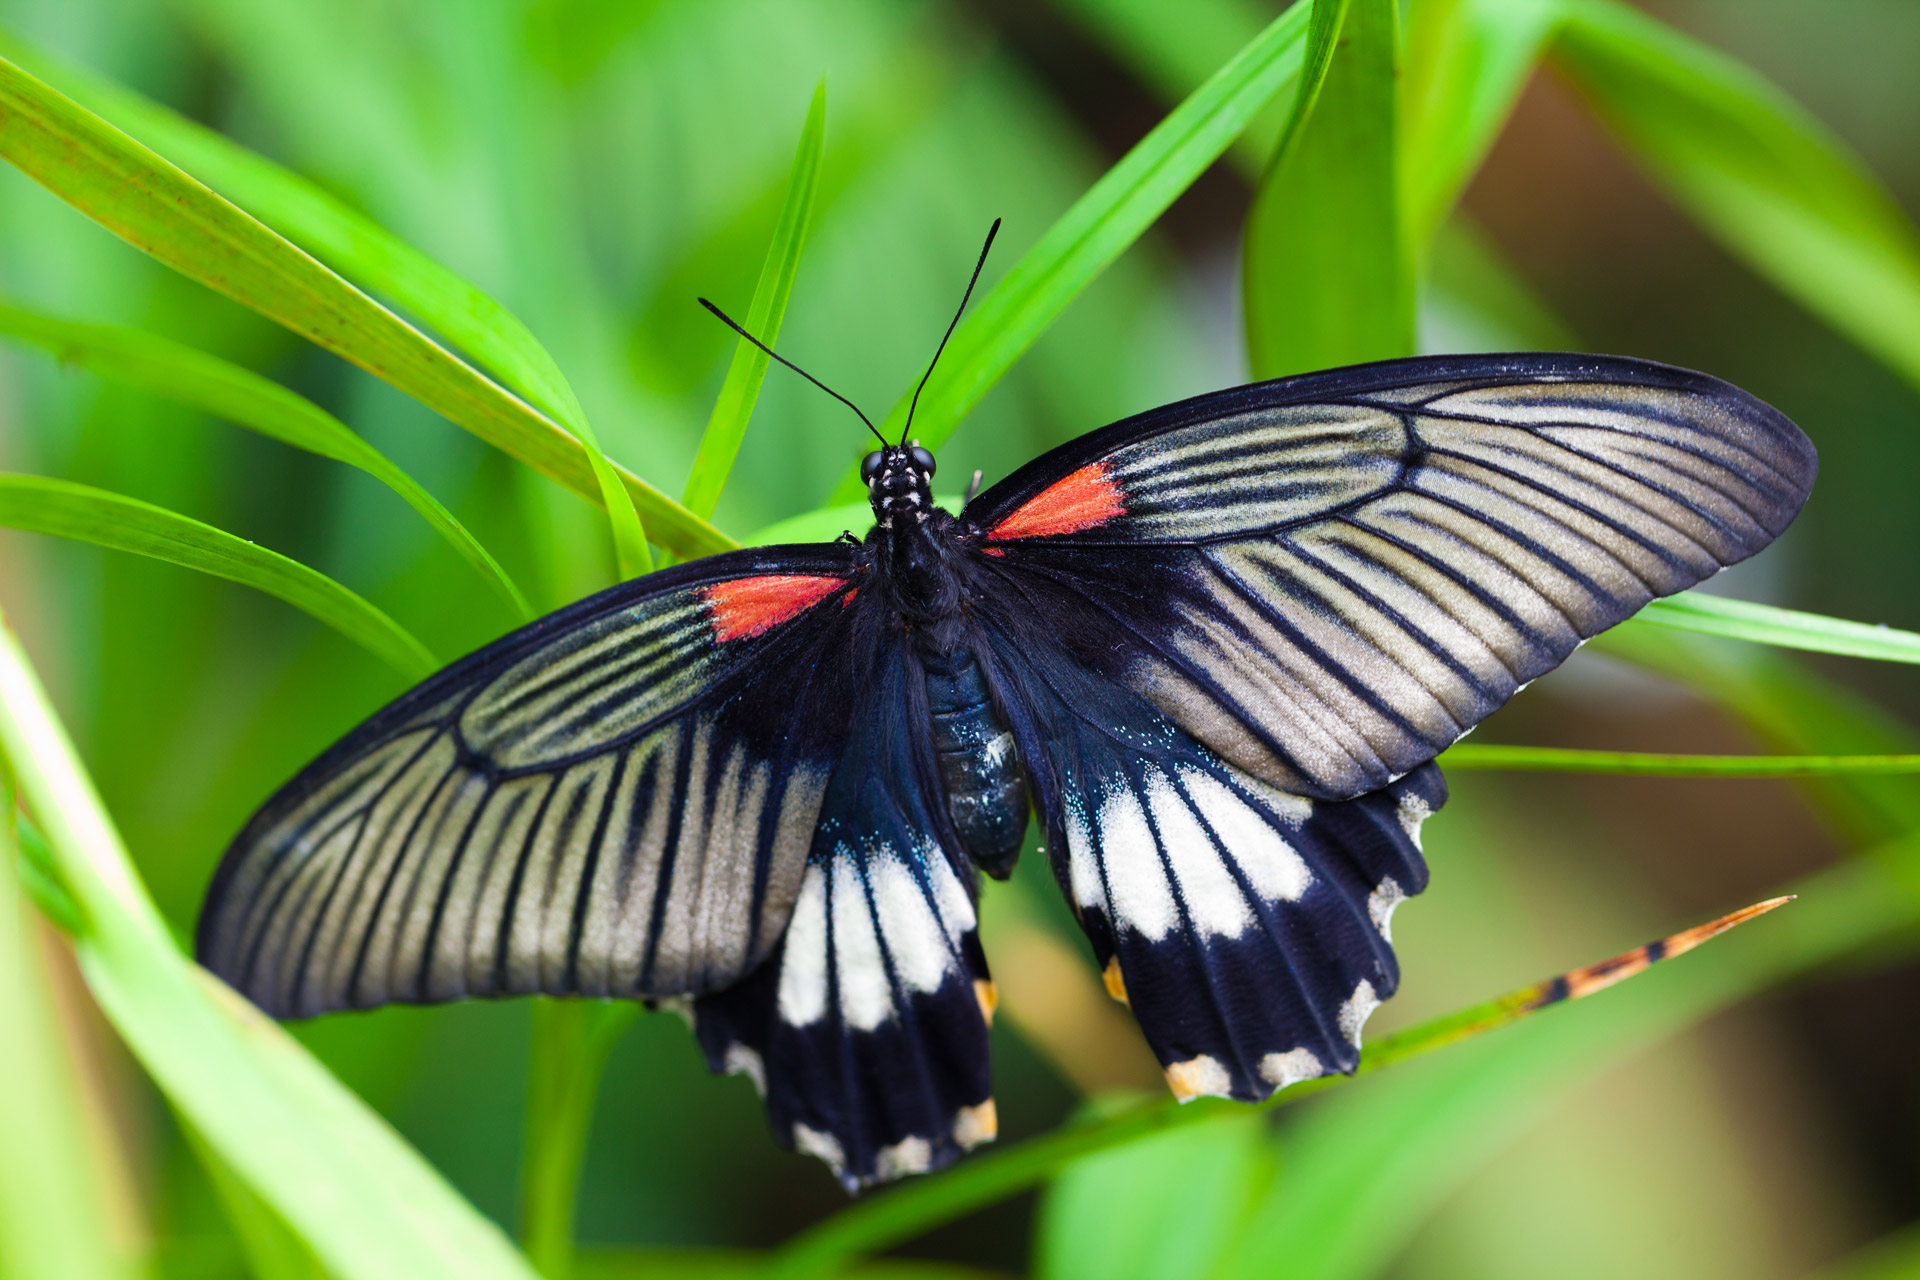 A beautiful black, white and red butterfly sitting on grass leaves